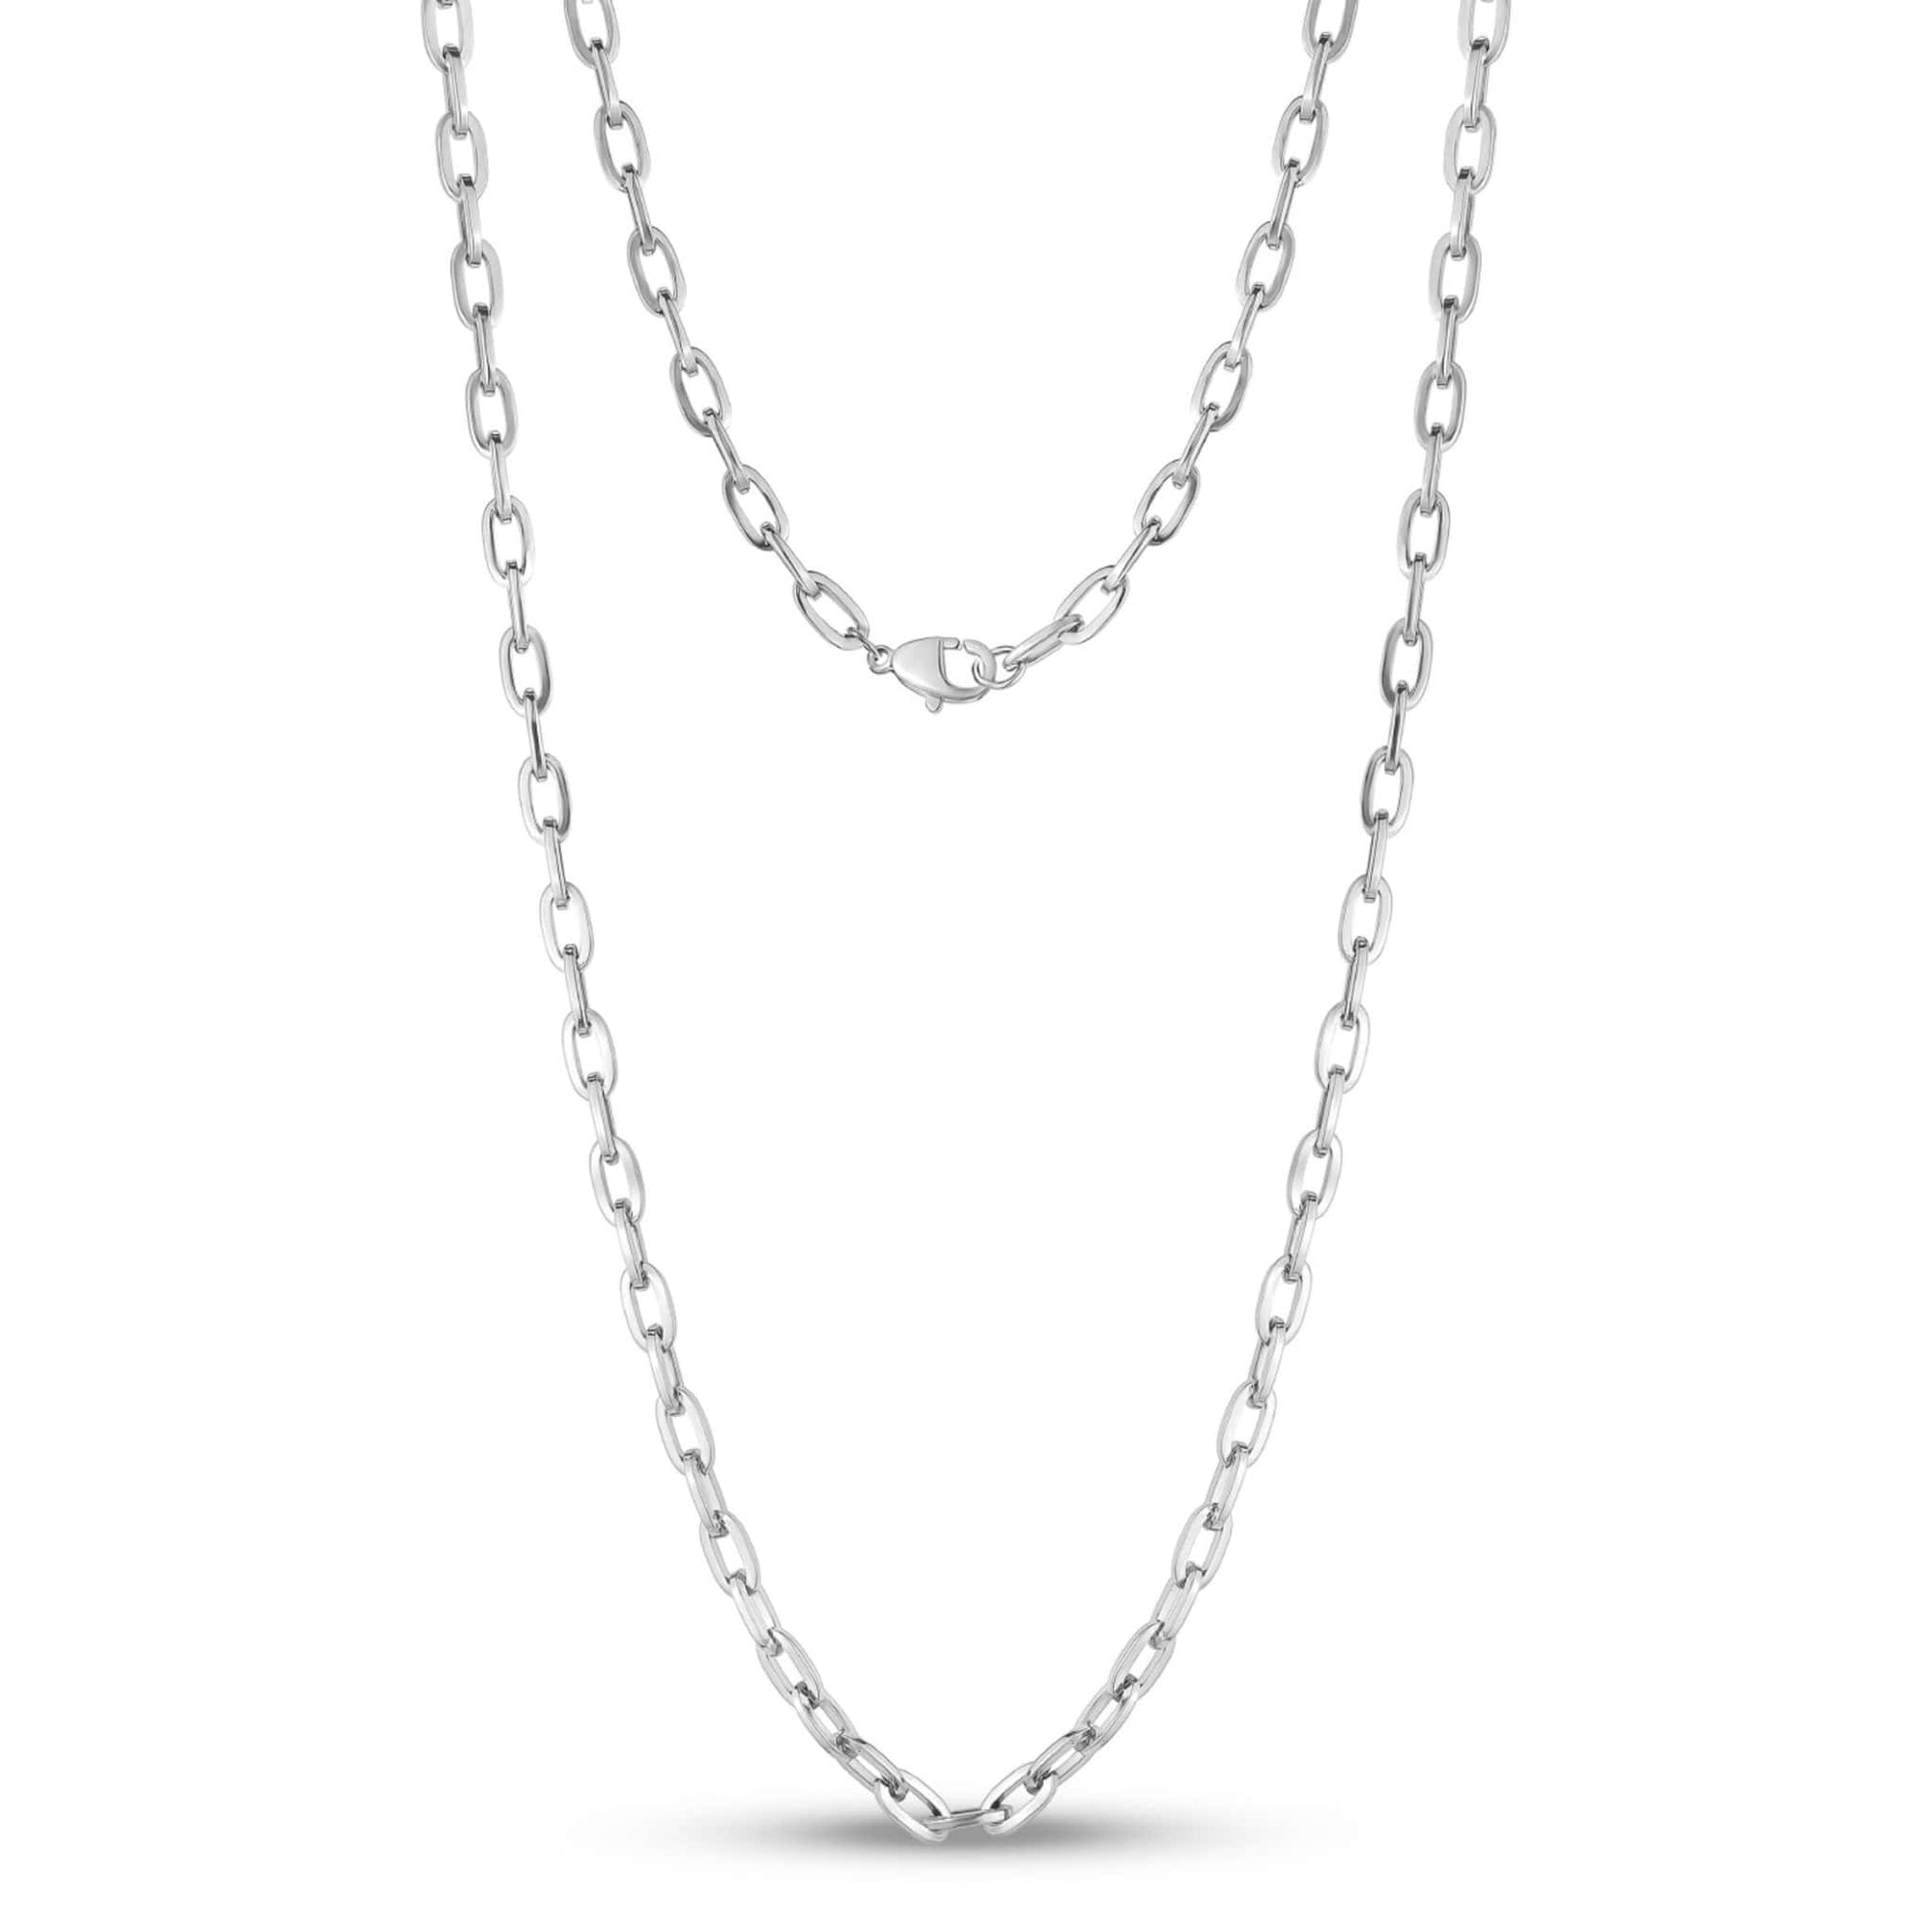 4.5mm Stainless Steel Oval Link Necklace at Arman's Jewellers